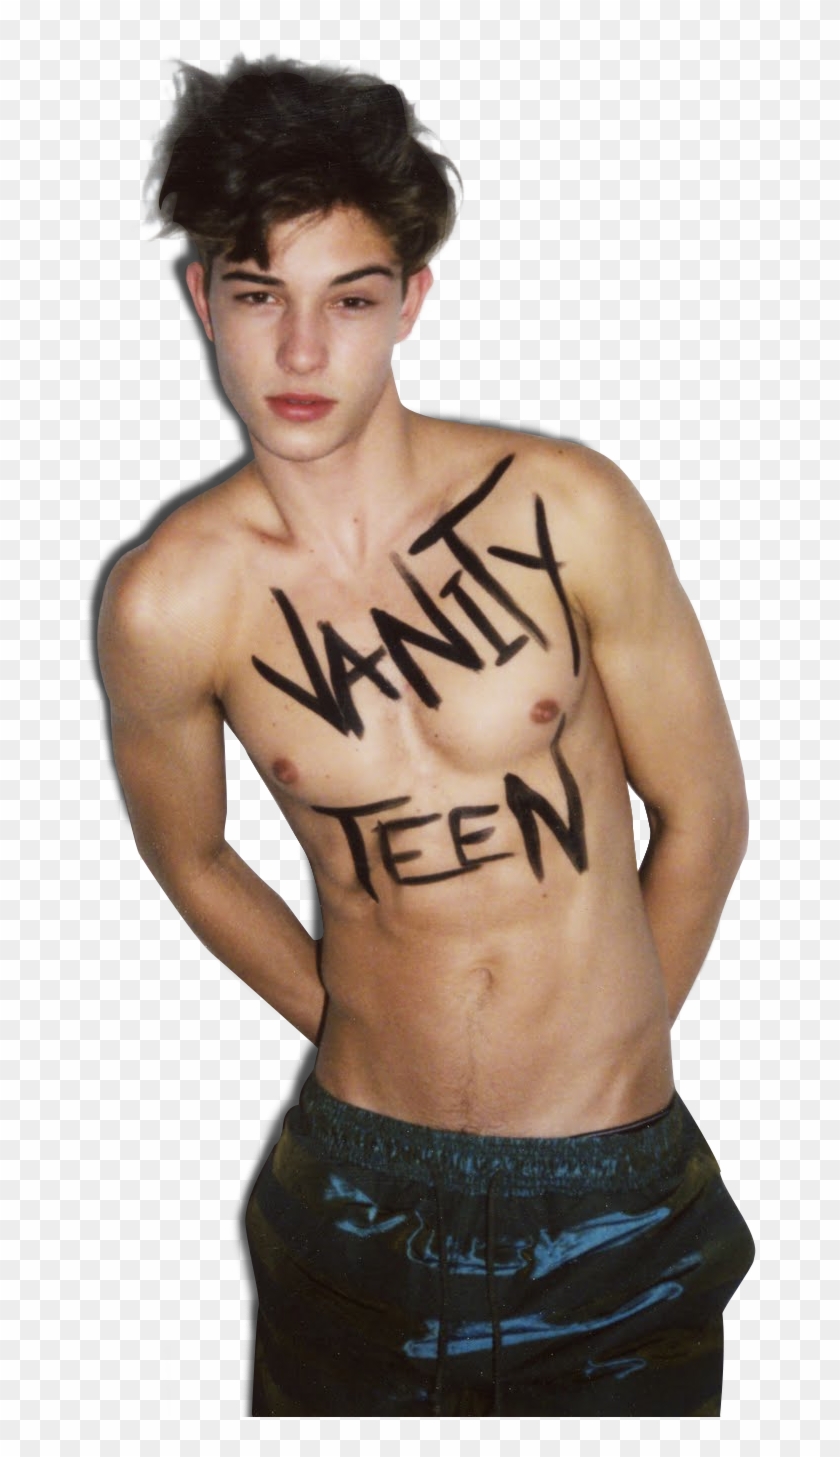 Transparent Francisco Lachowski Made By Totally Transparent - Francisco Lachowski Vanity Teen Clipart #4082765